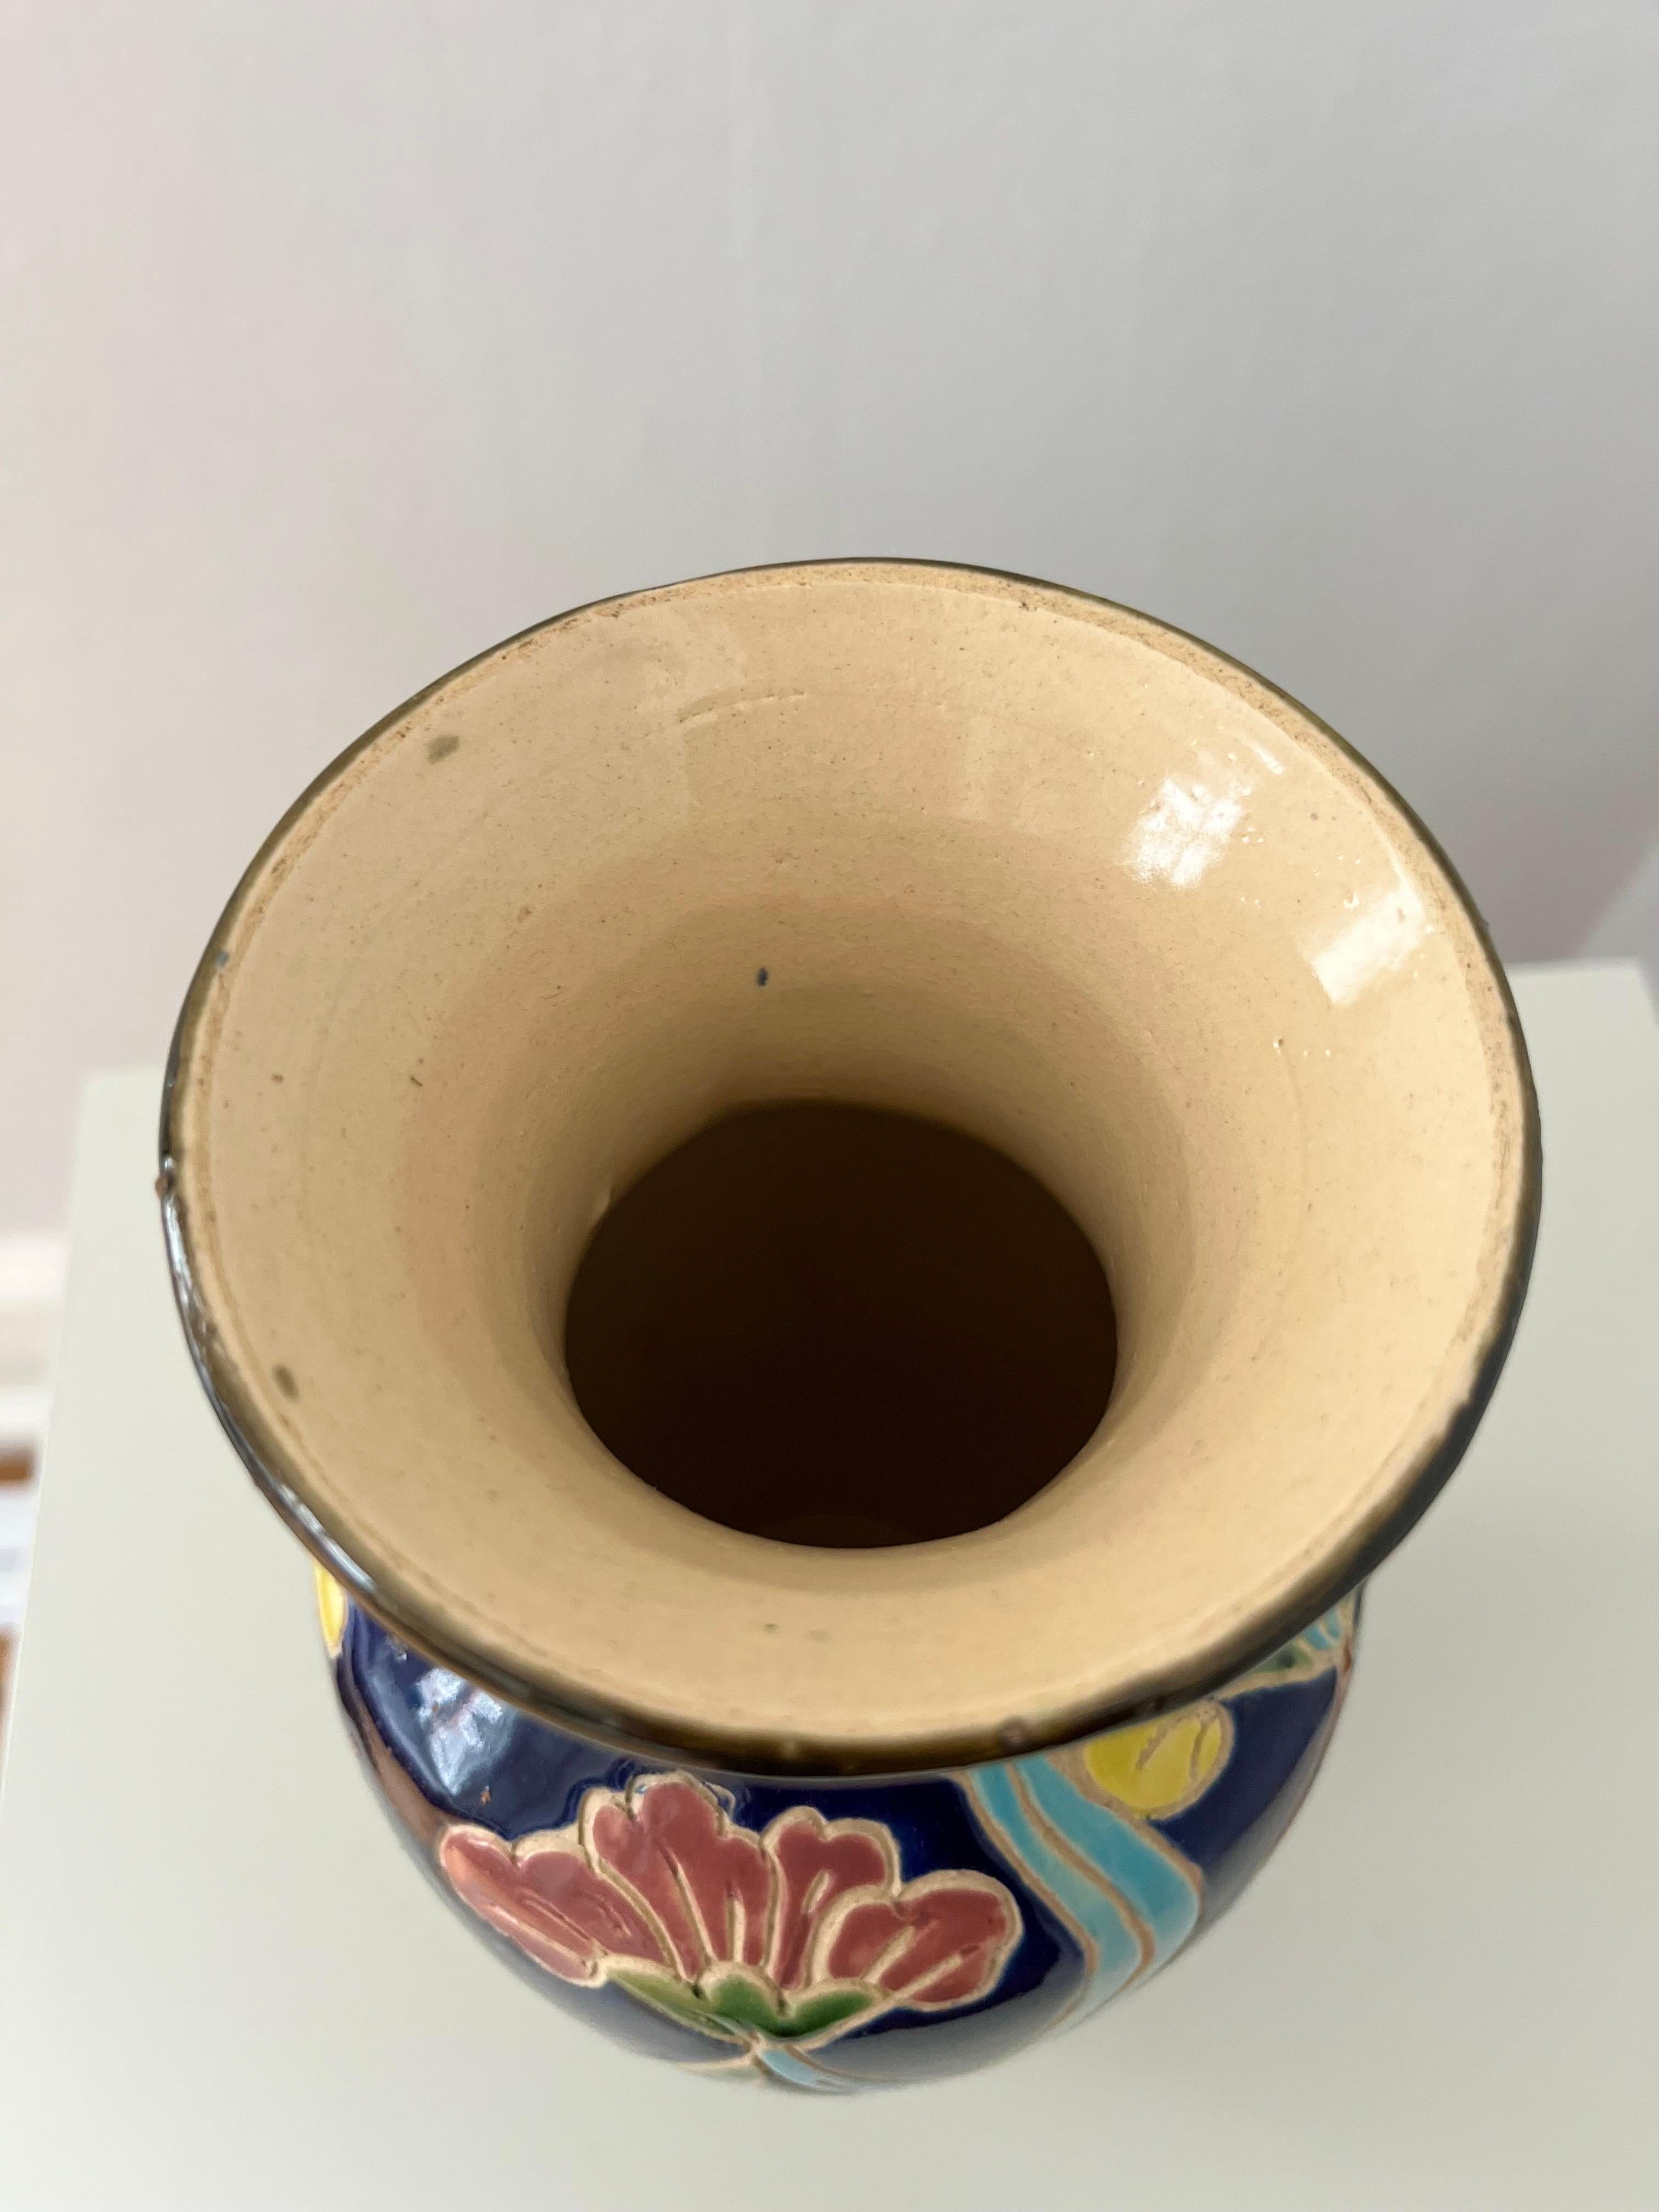 1960s/1970s Scandinavian Organic Modern Ceramic Vase with Colorful Floral Motifs For Sale 5